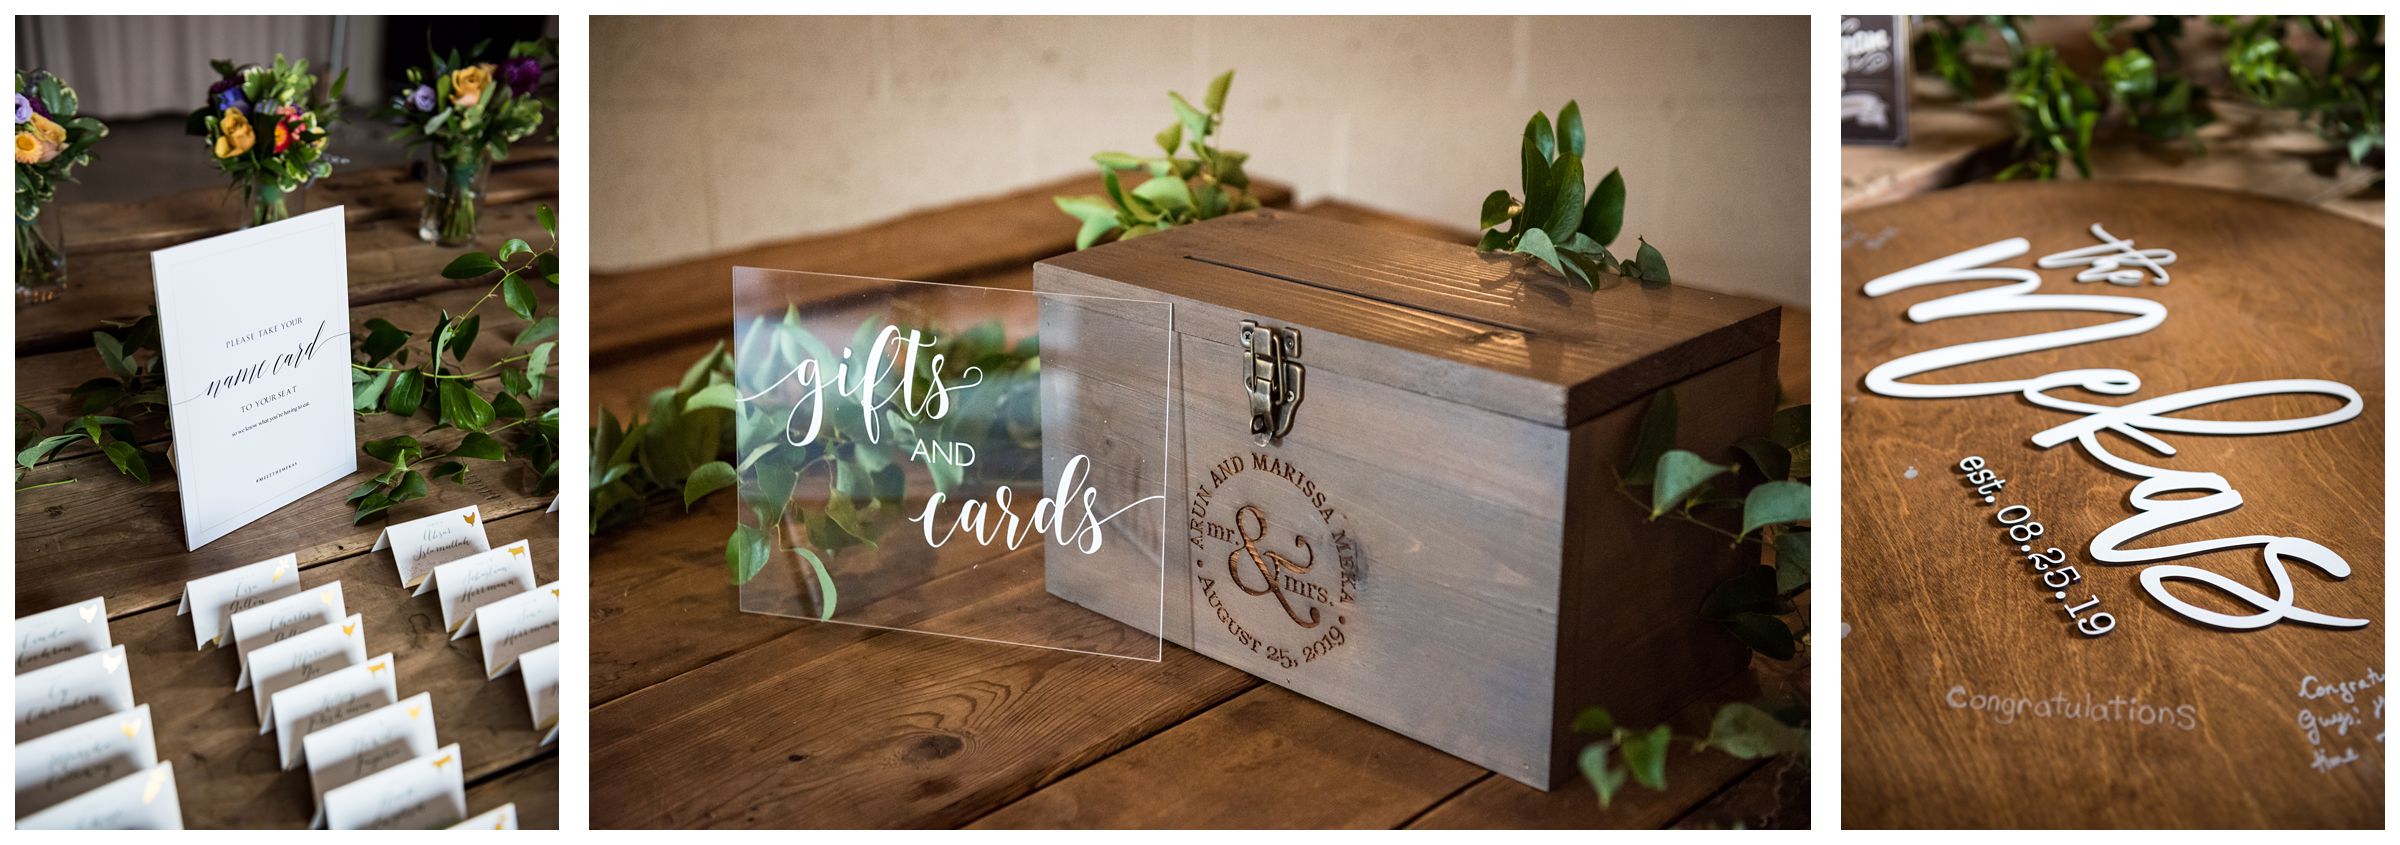 custom engraved wooden wedding card box, wooden guestbook sign, greenery and acrylic wedding signs